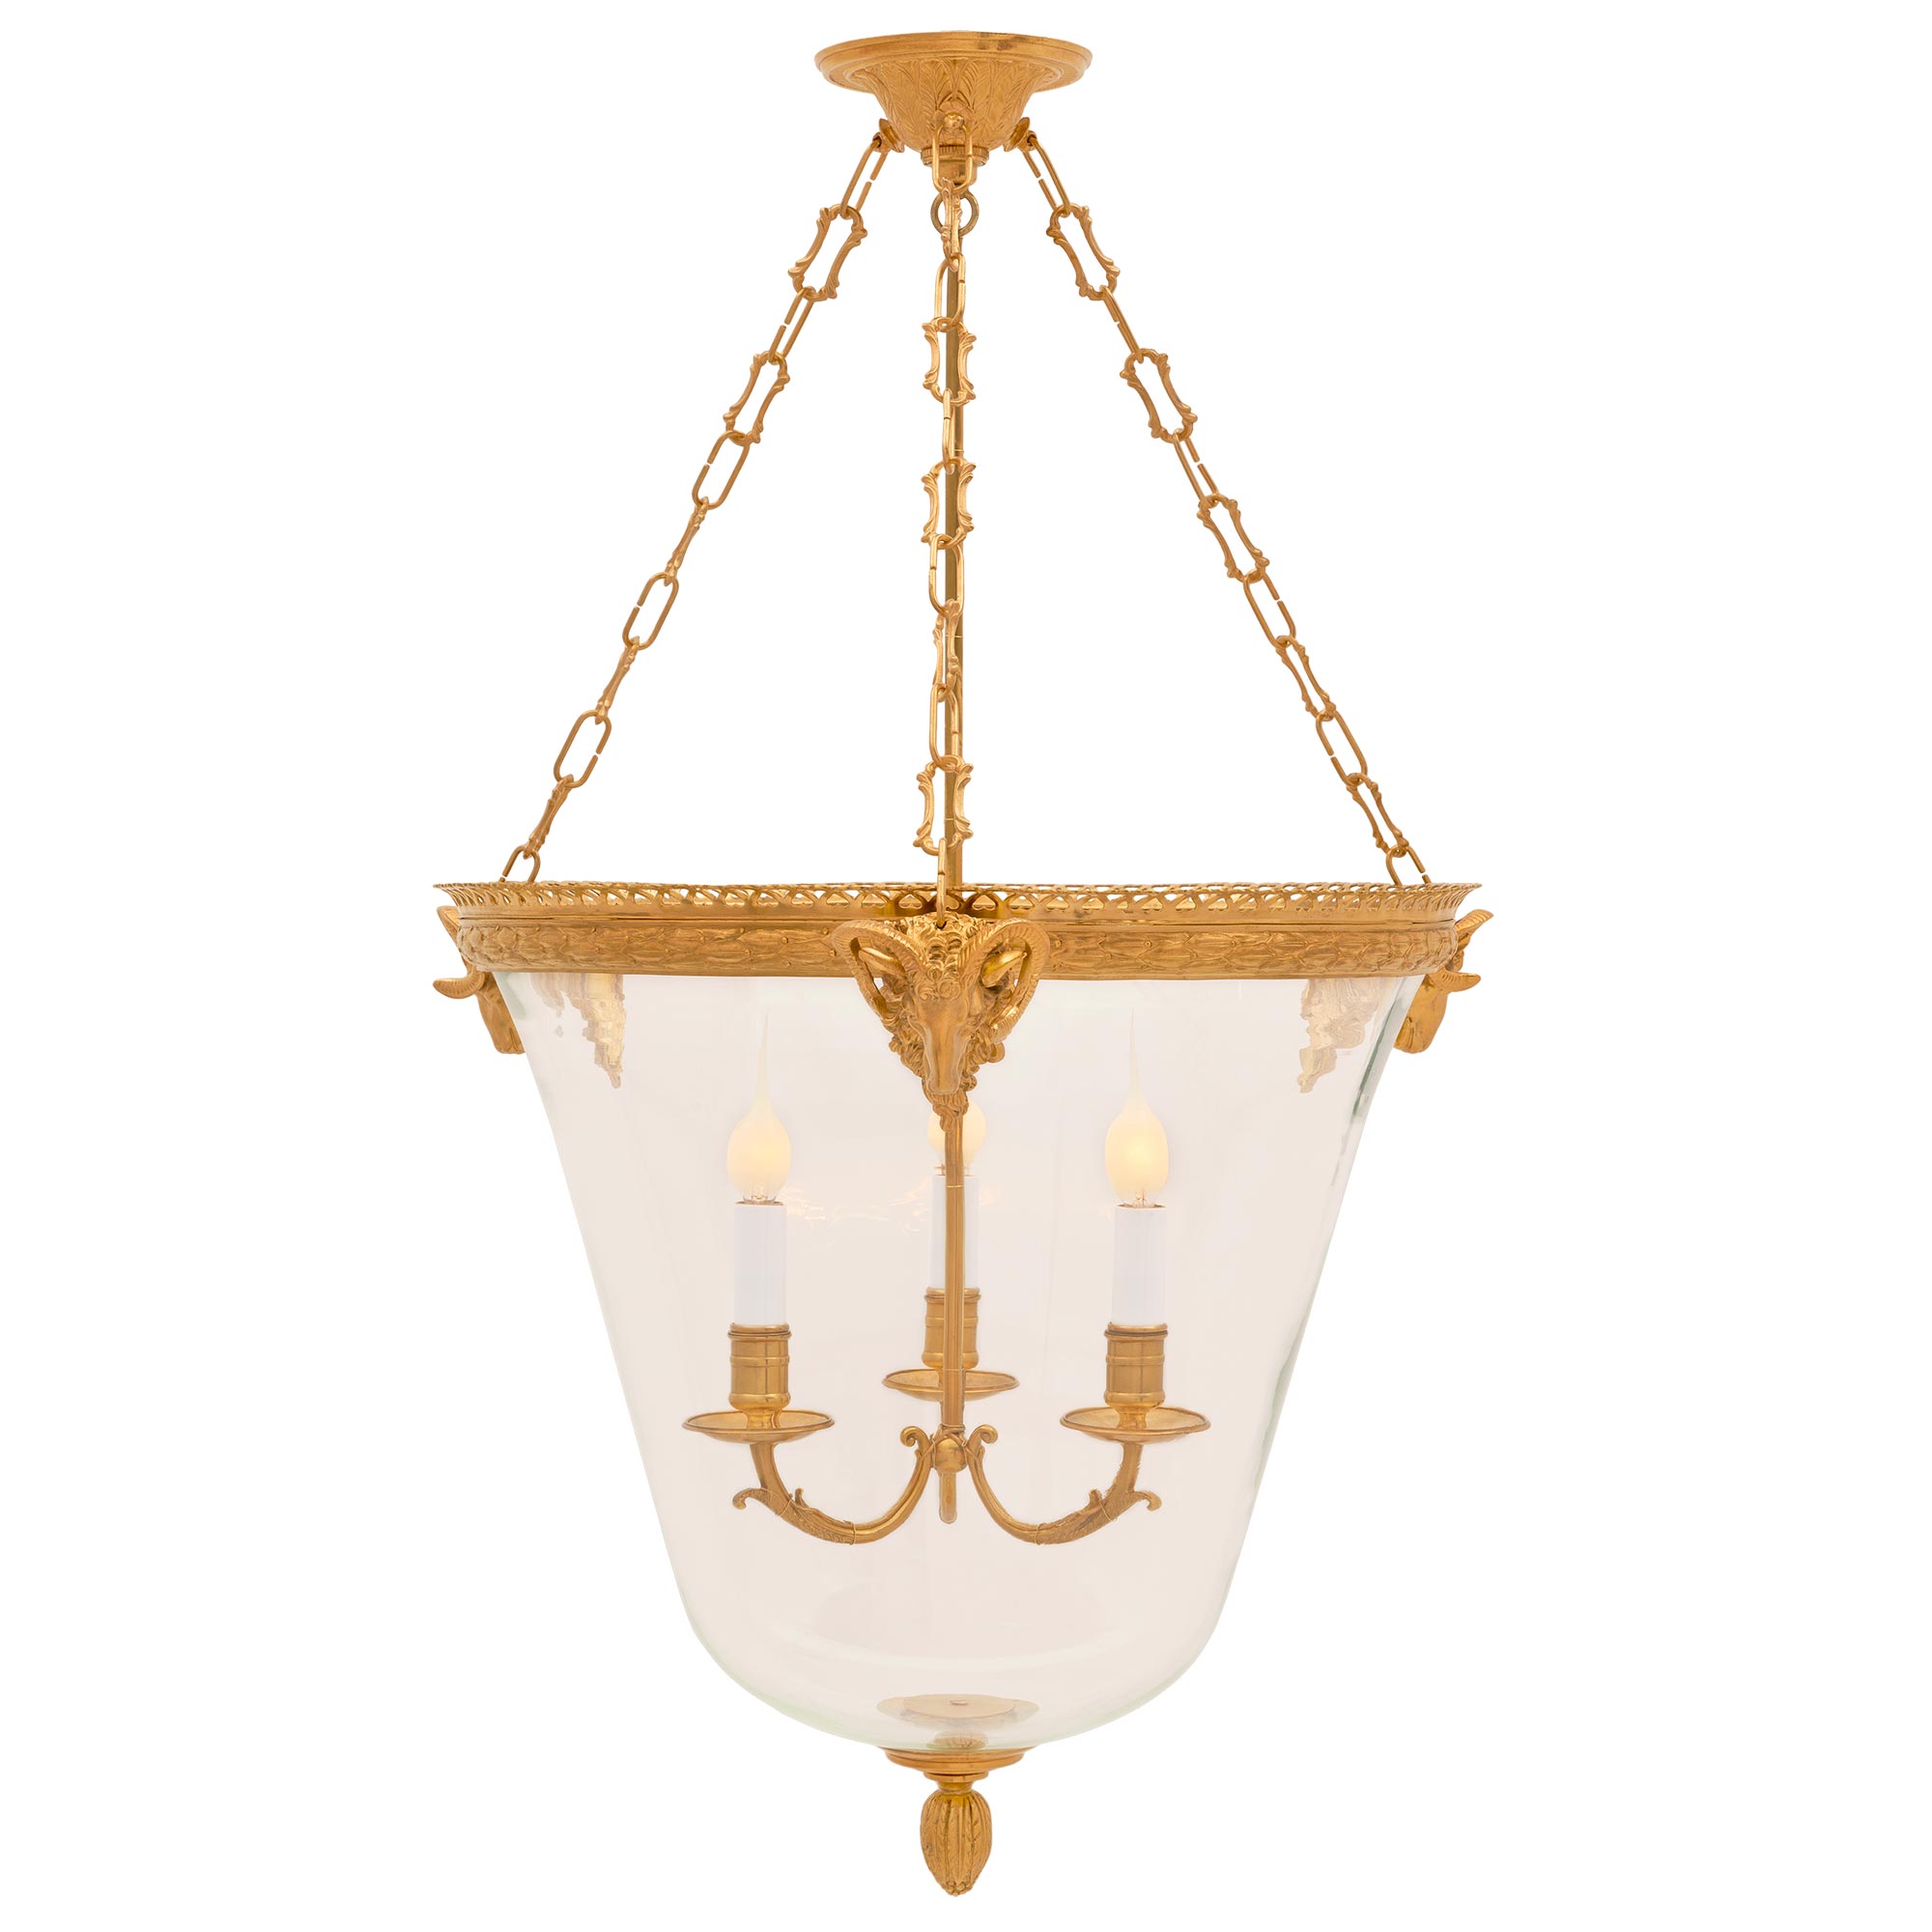 French 19th Century Louis XVI St. Belle Époque Period Ormolu and Glass Lantern For Sale